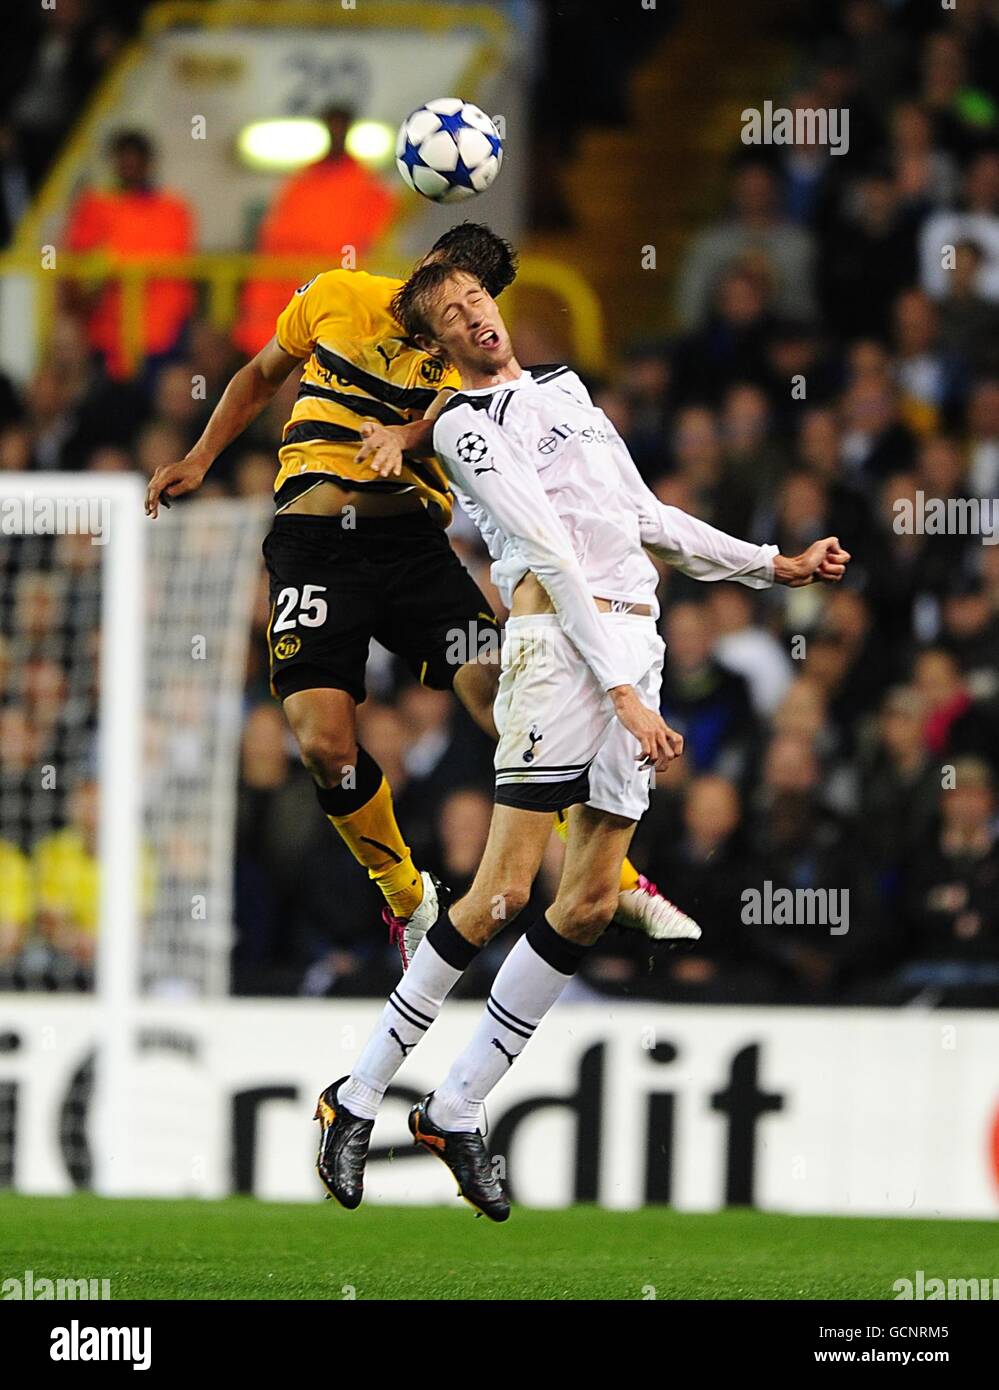 Soccer - UEFA Champions League - Play Offs - Second Leg - Tottenham Hotspur v Young Boys - White Hart Lane. Young Boys' Ammar Jemal (left) and Tottenham Hotspur's Peter Crouch (right) battle for the ball Stock Photo